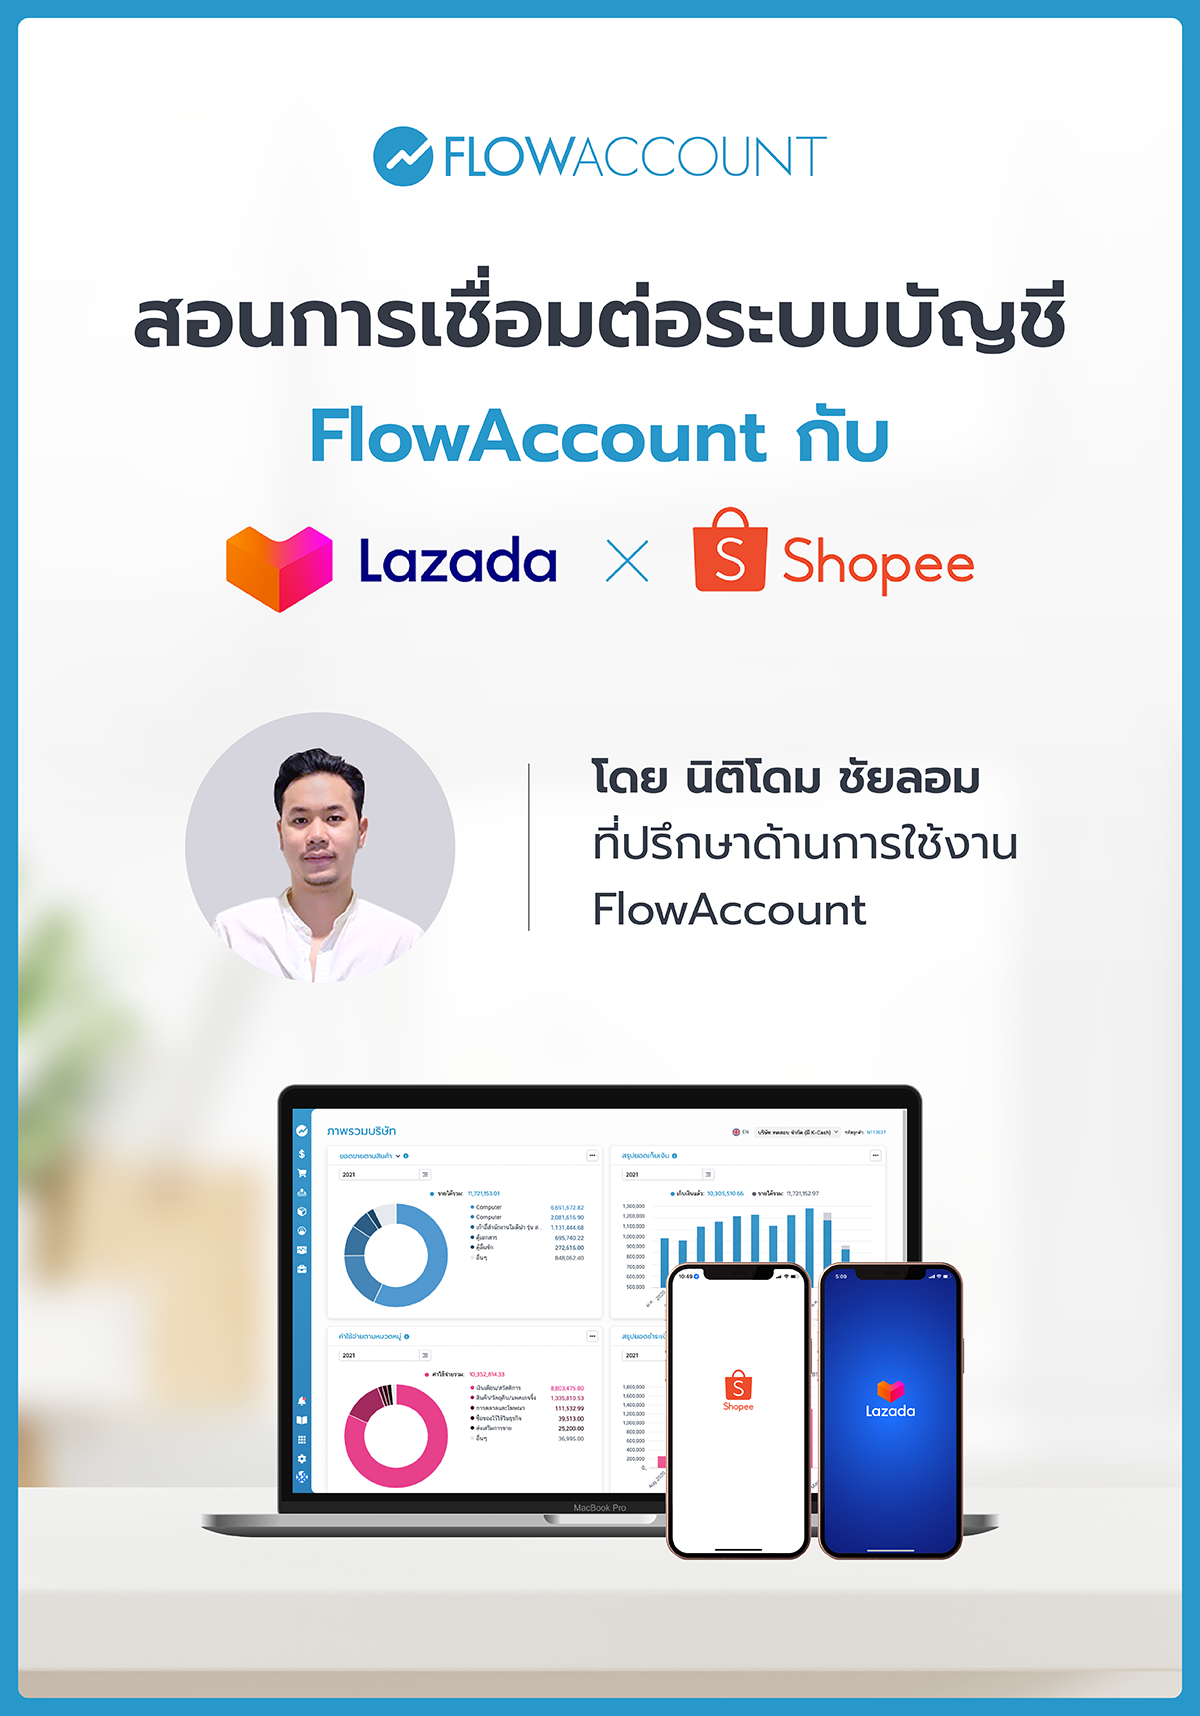 FlowAccount Business Suite for Shopee & Lazada